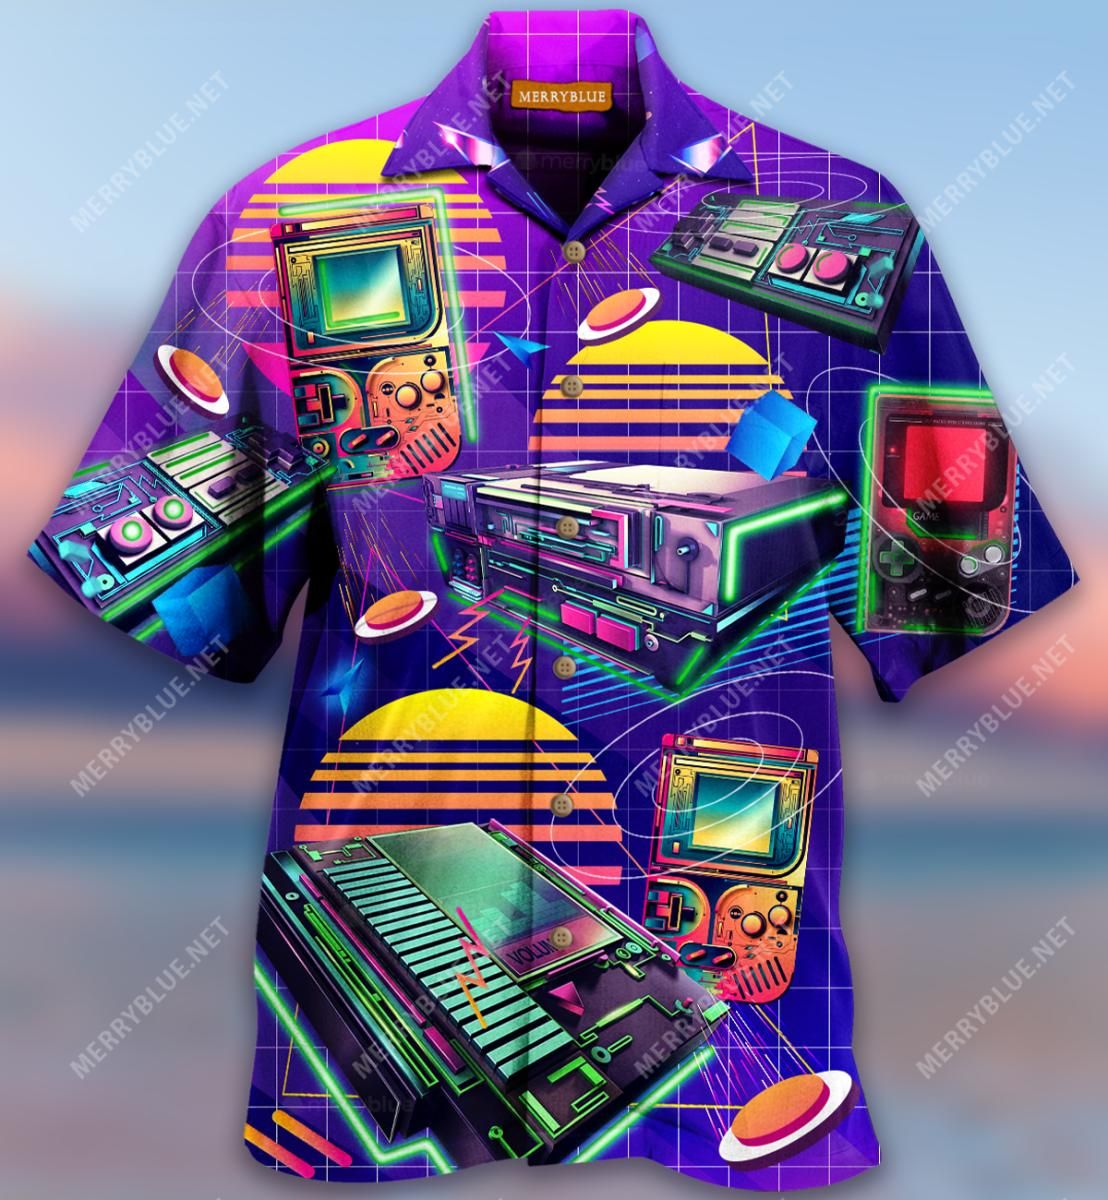 Game Consoles In The 80'S Memory Aloha Hawaiian Shirt Colorful Short Sleeve Summer Beach Casual Shirt For Men And Women